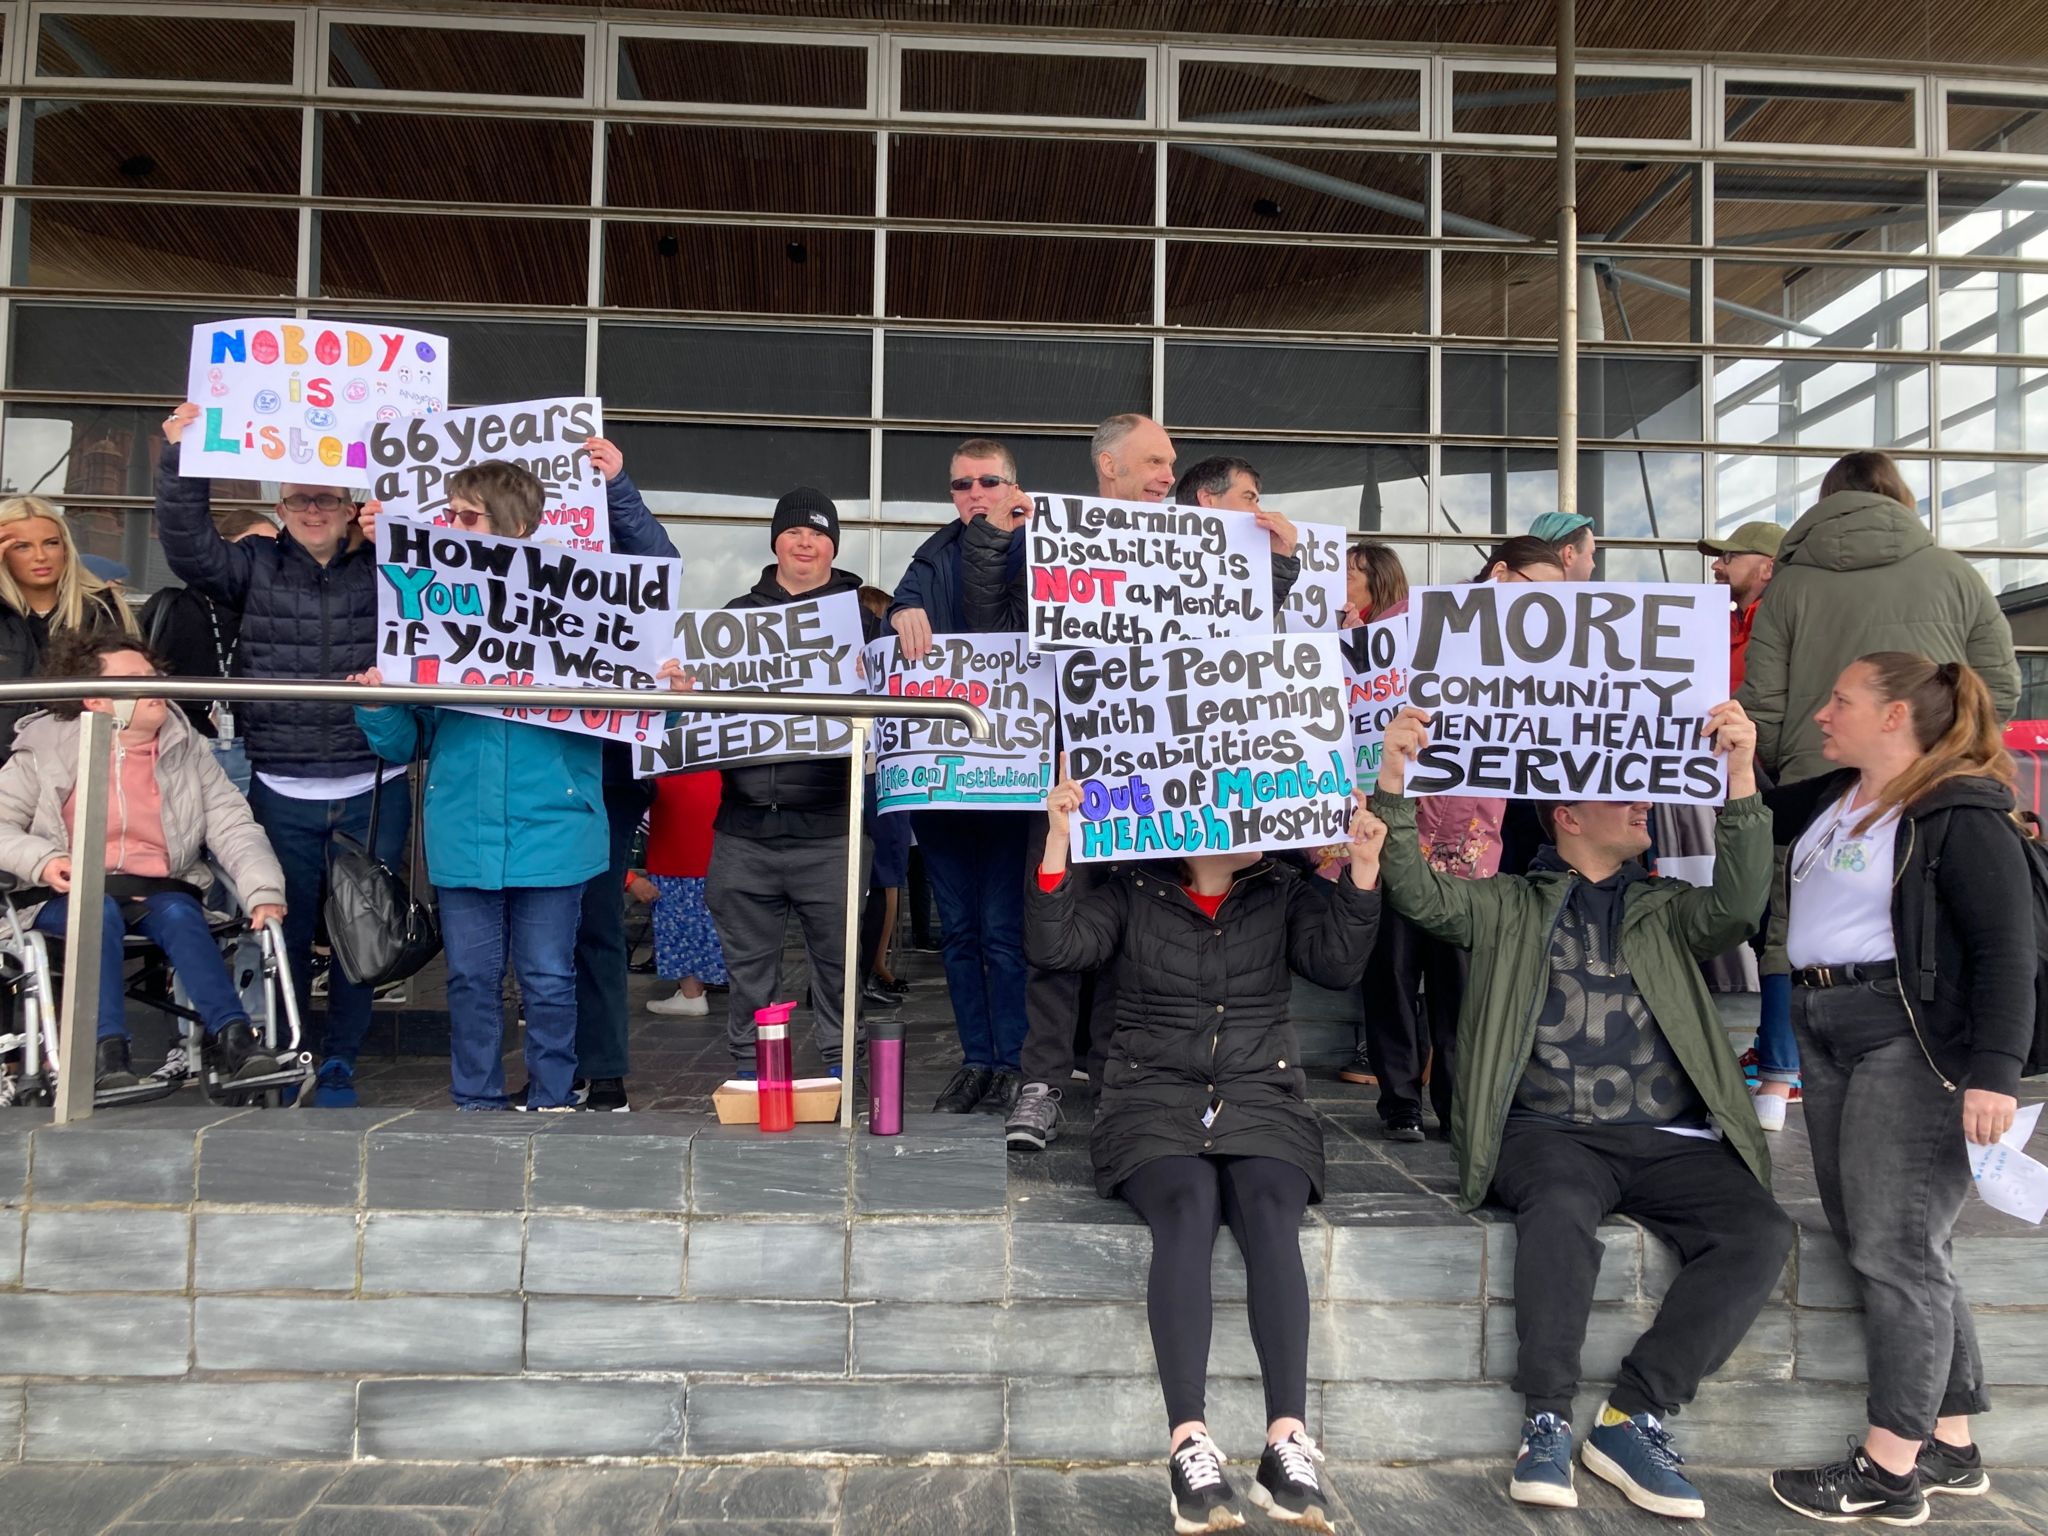 About 150 people attended a protest outside the Senedd